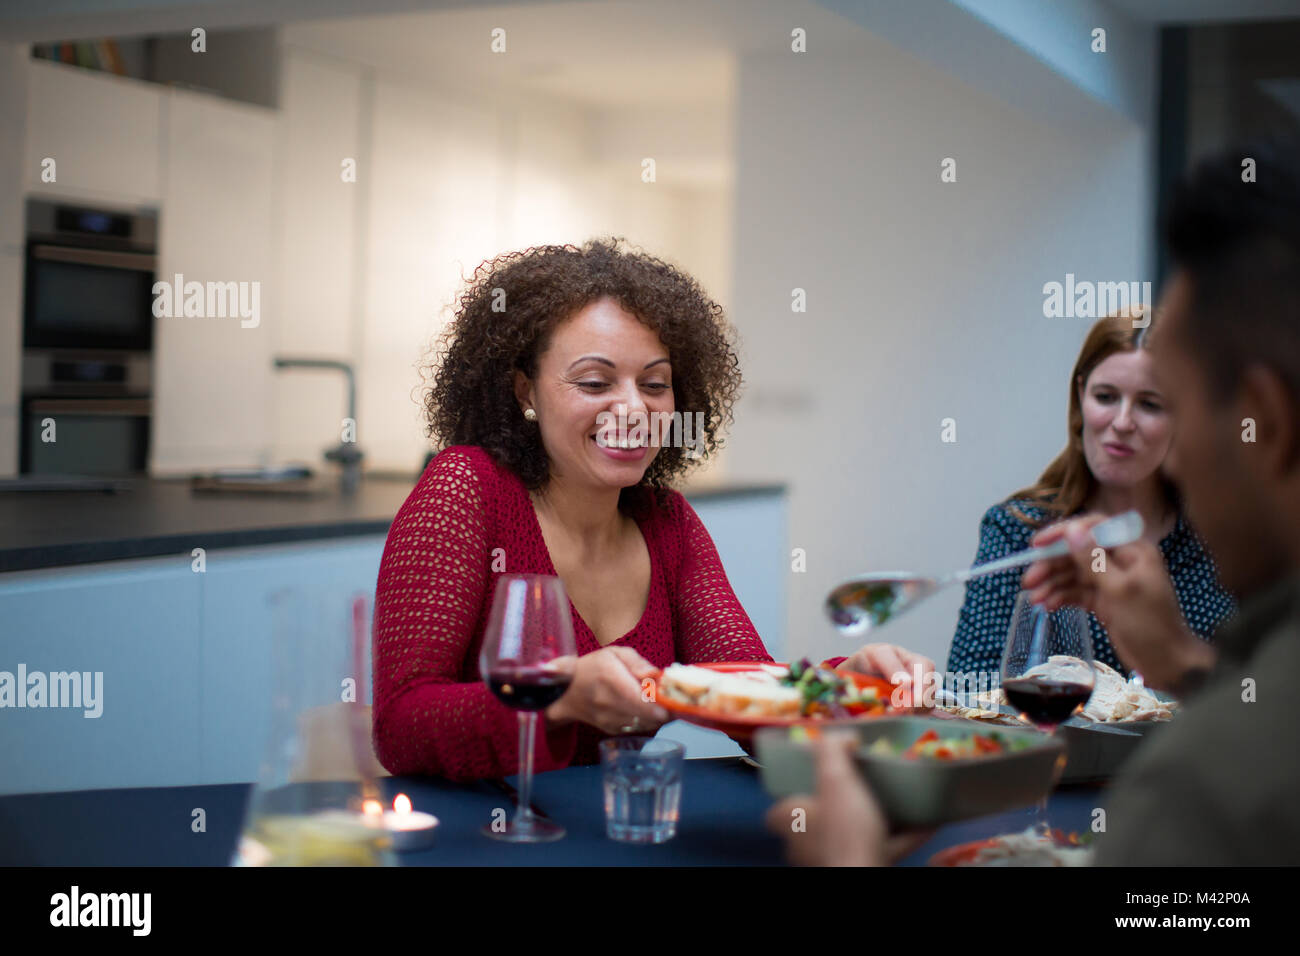 Adult male serving food to a friend Stock Photo